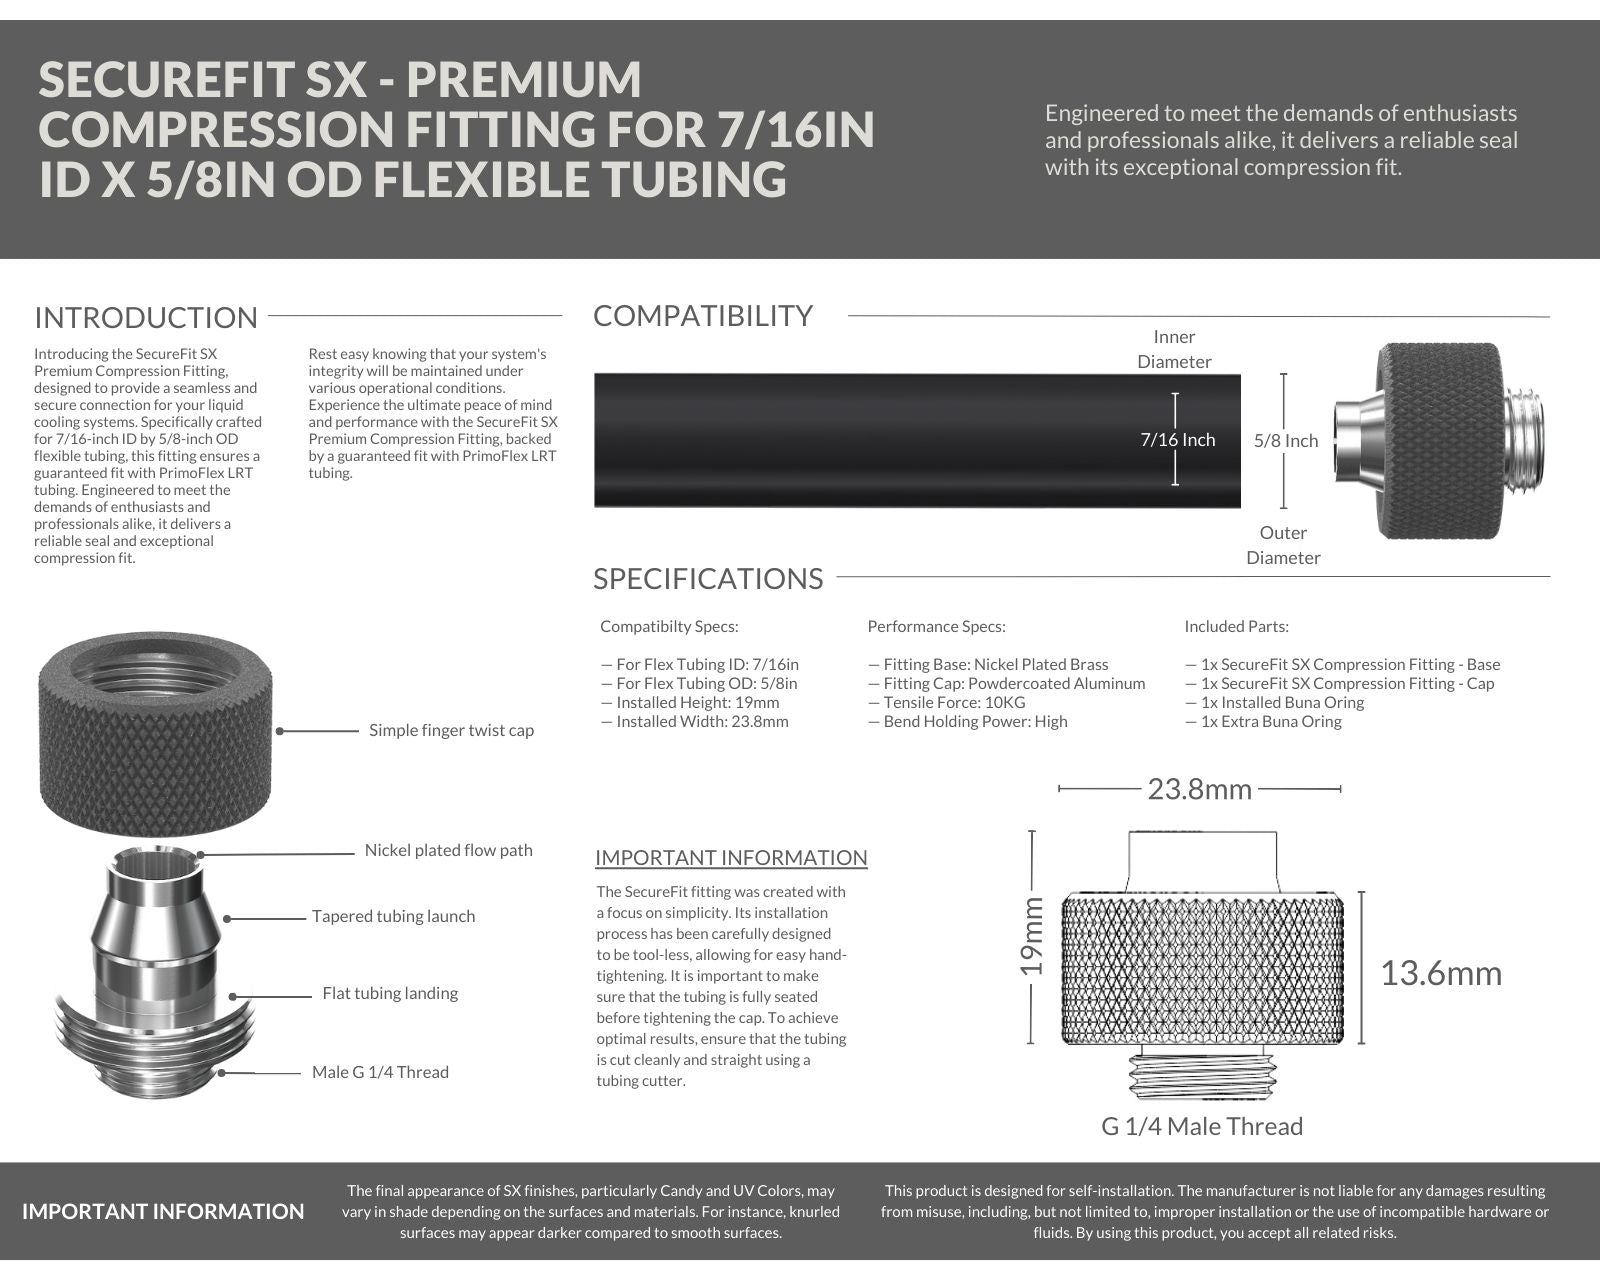 PrimoChill SecureFit SX - Premium Compression Fitting For 7/16in ID x 5/8in OD Flexible Tubing (F-SFSX758) - Available in 20+ Colors, Custom Watercooling Loop Ready - TX Matte Gun Metal